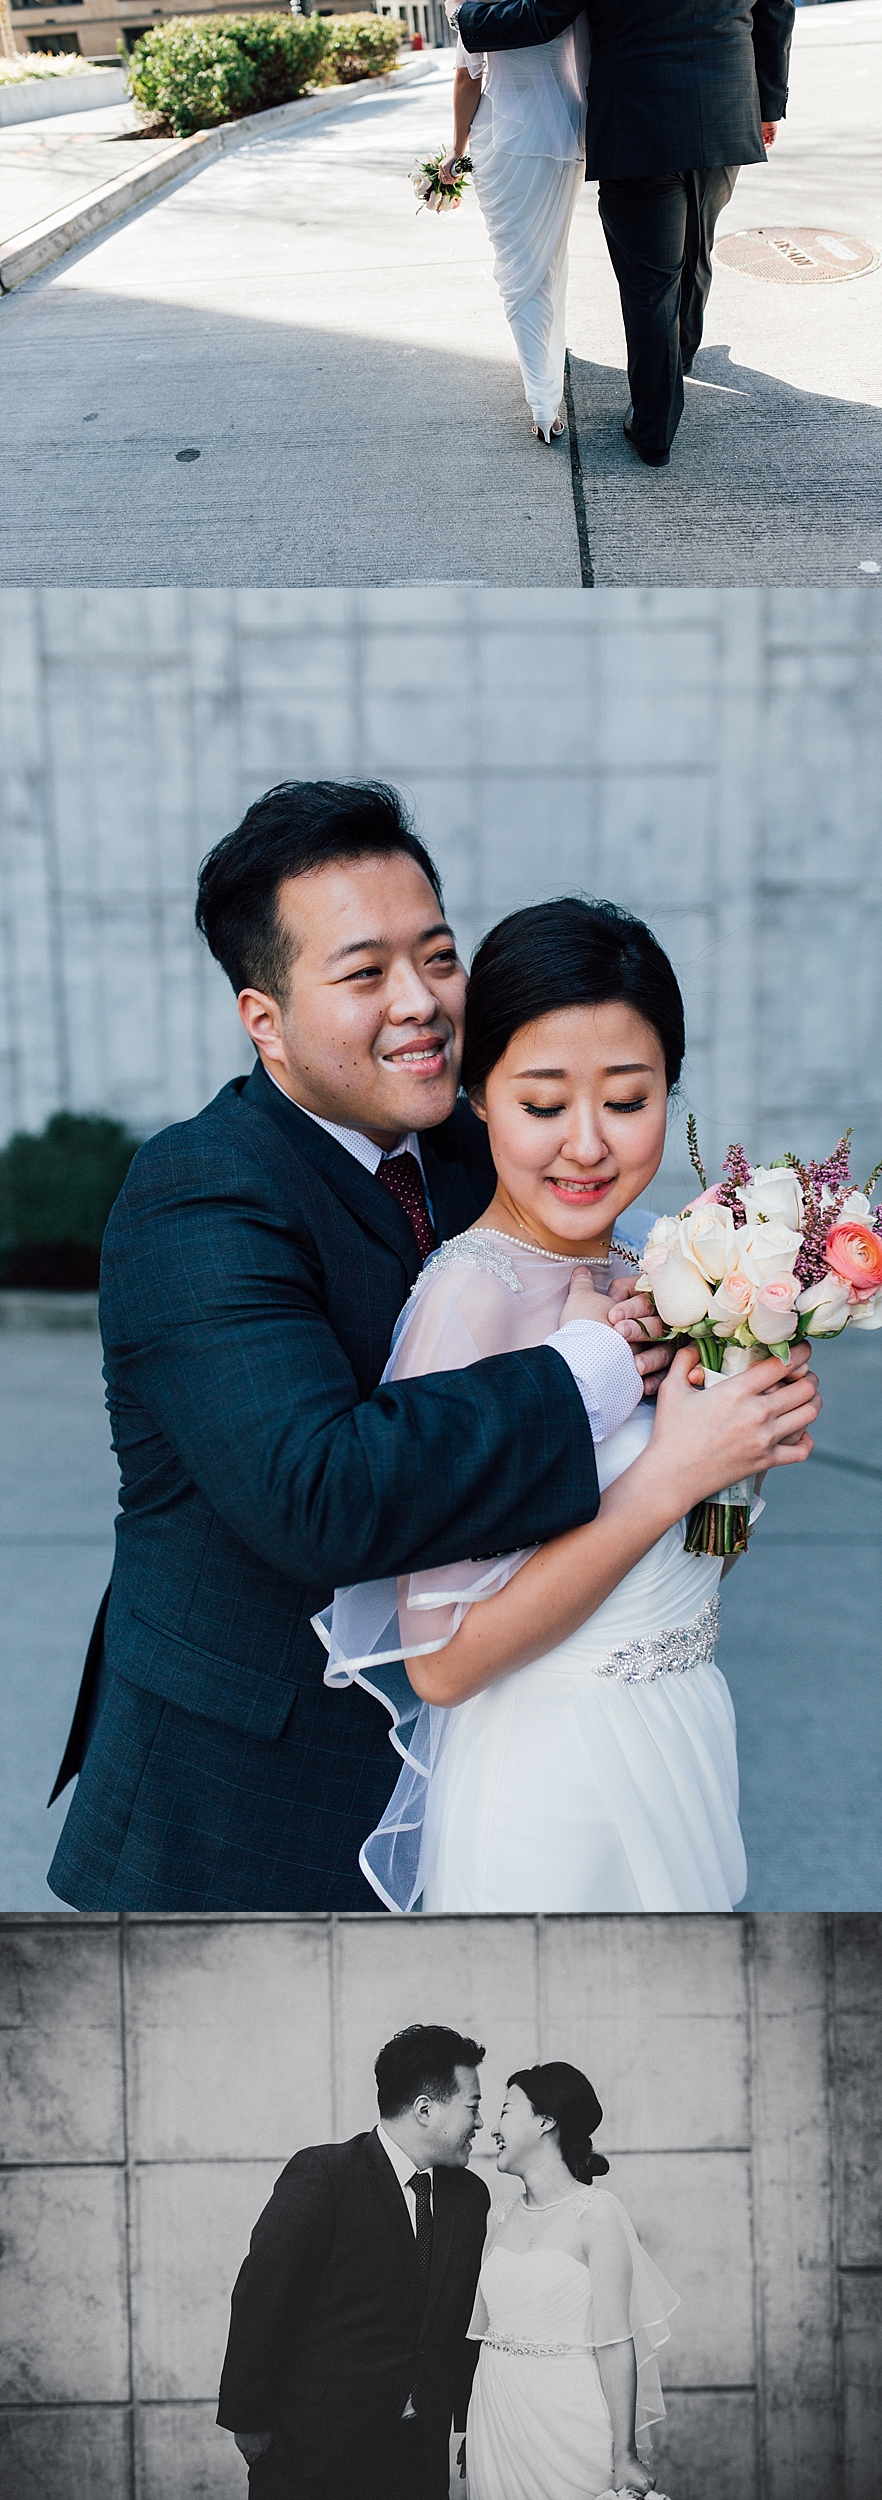 Seattle Courthouse Wedding Photographer PNW elopement Photography - Annie & Alan - Ashley Vos Photography-7.jpg